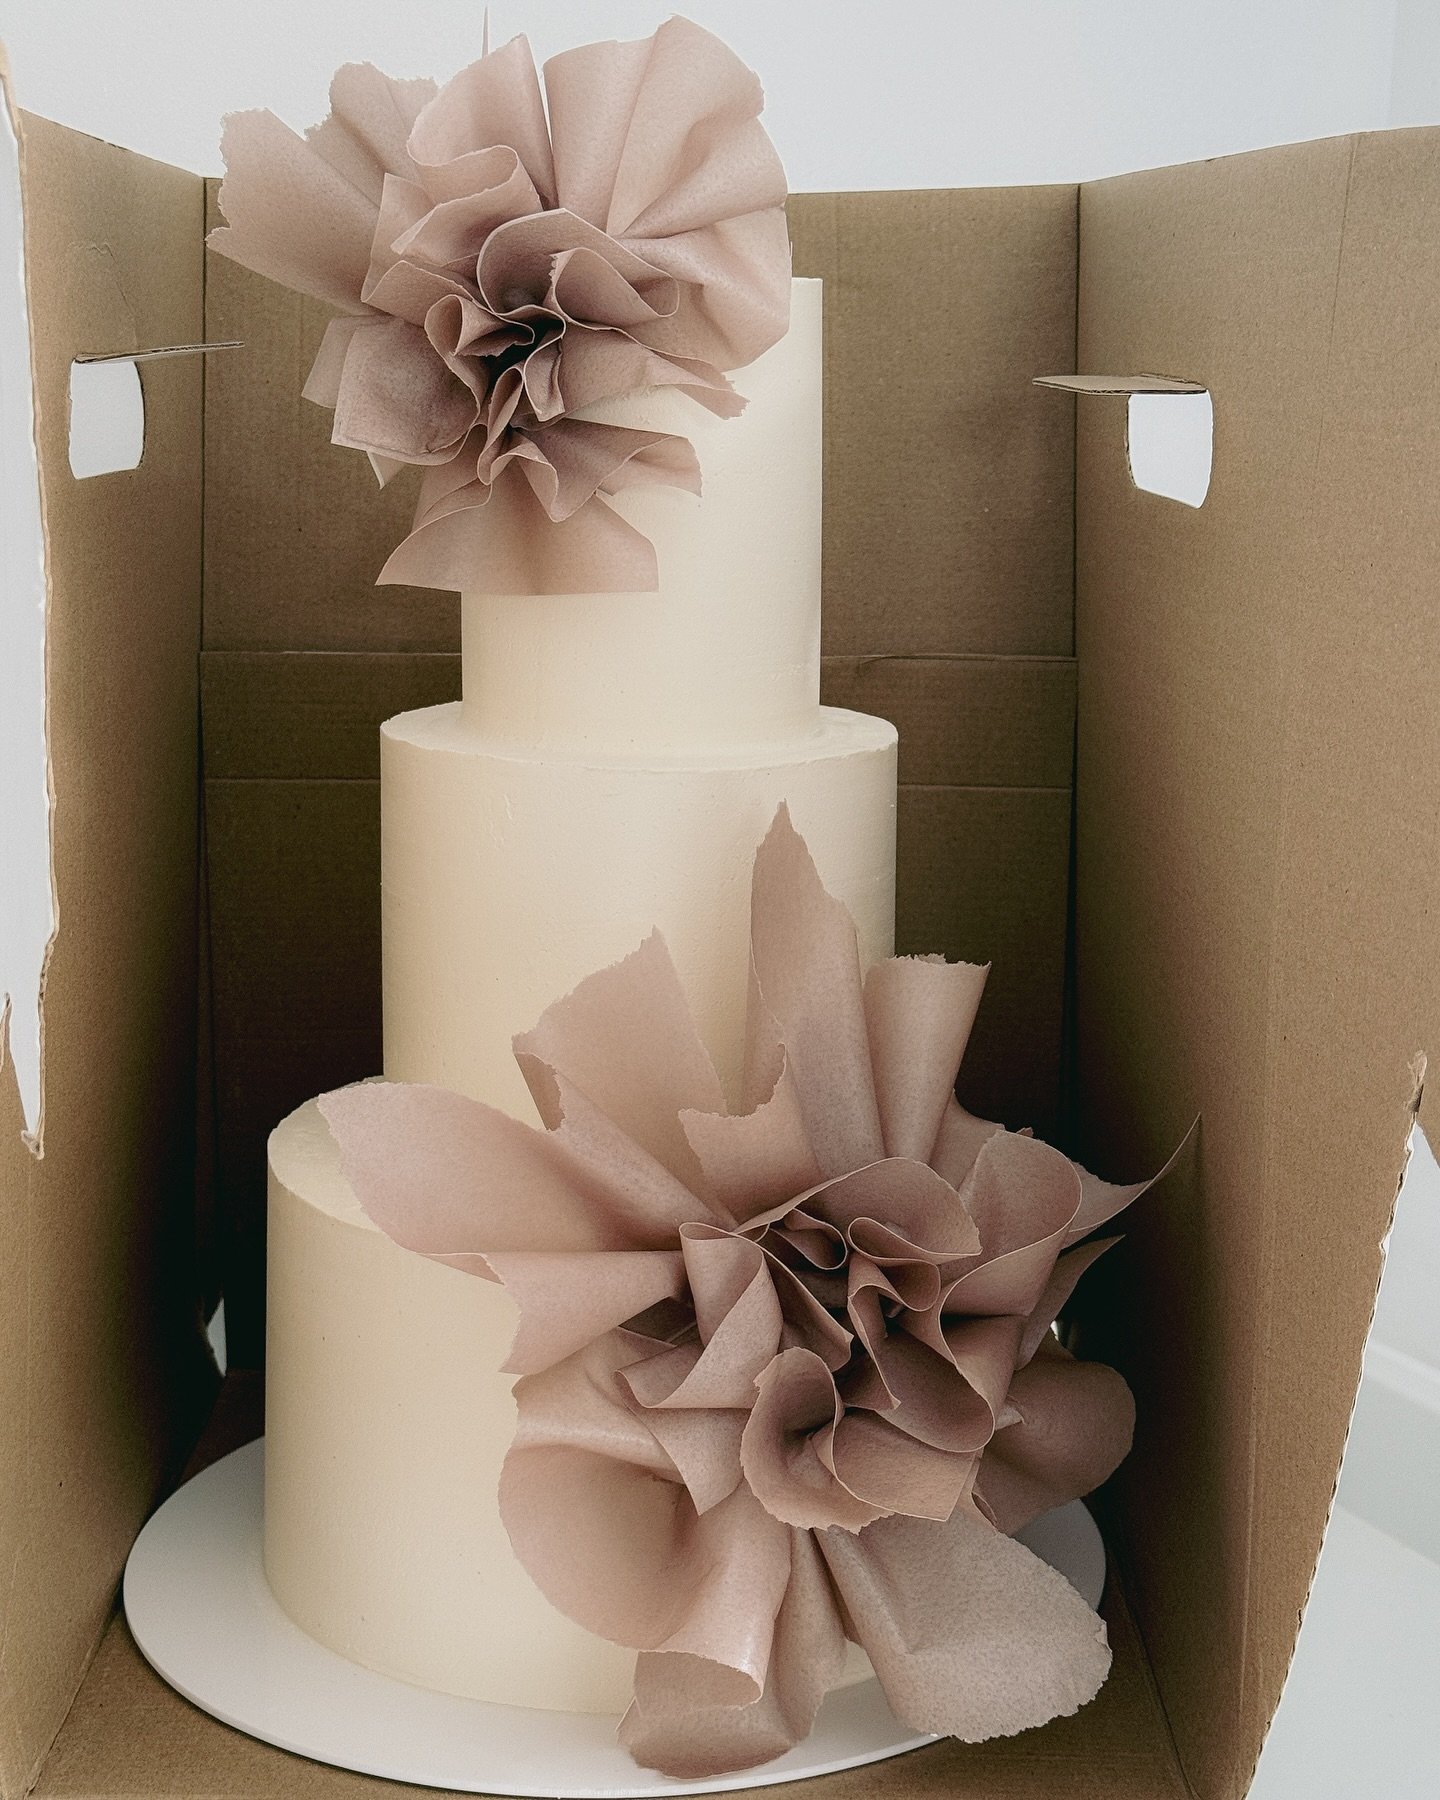 Oversized everything 🤍

Oversized ruffle arrangements travelling in style in @boxsecure 

Lots of new designs coming for 2024&hellip;thank you to my couples for embracing my cake visions! 

#weddingcake #cake #lovecake #weddingcakeinspiration #wafer